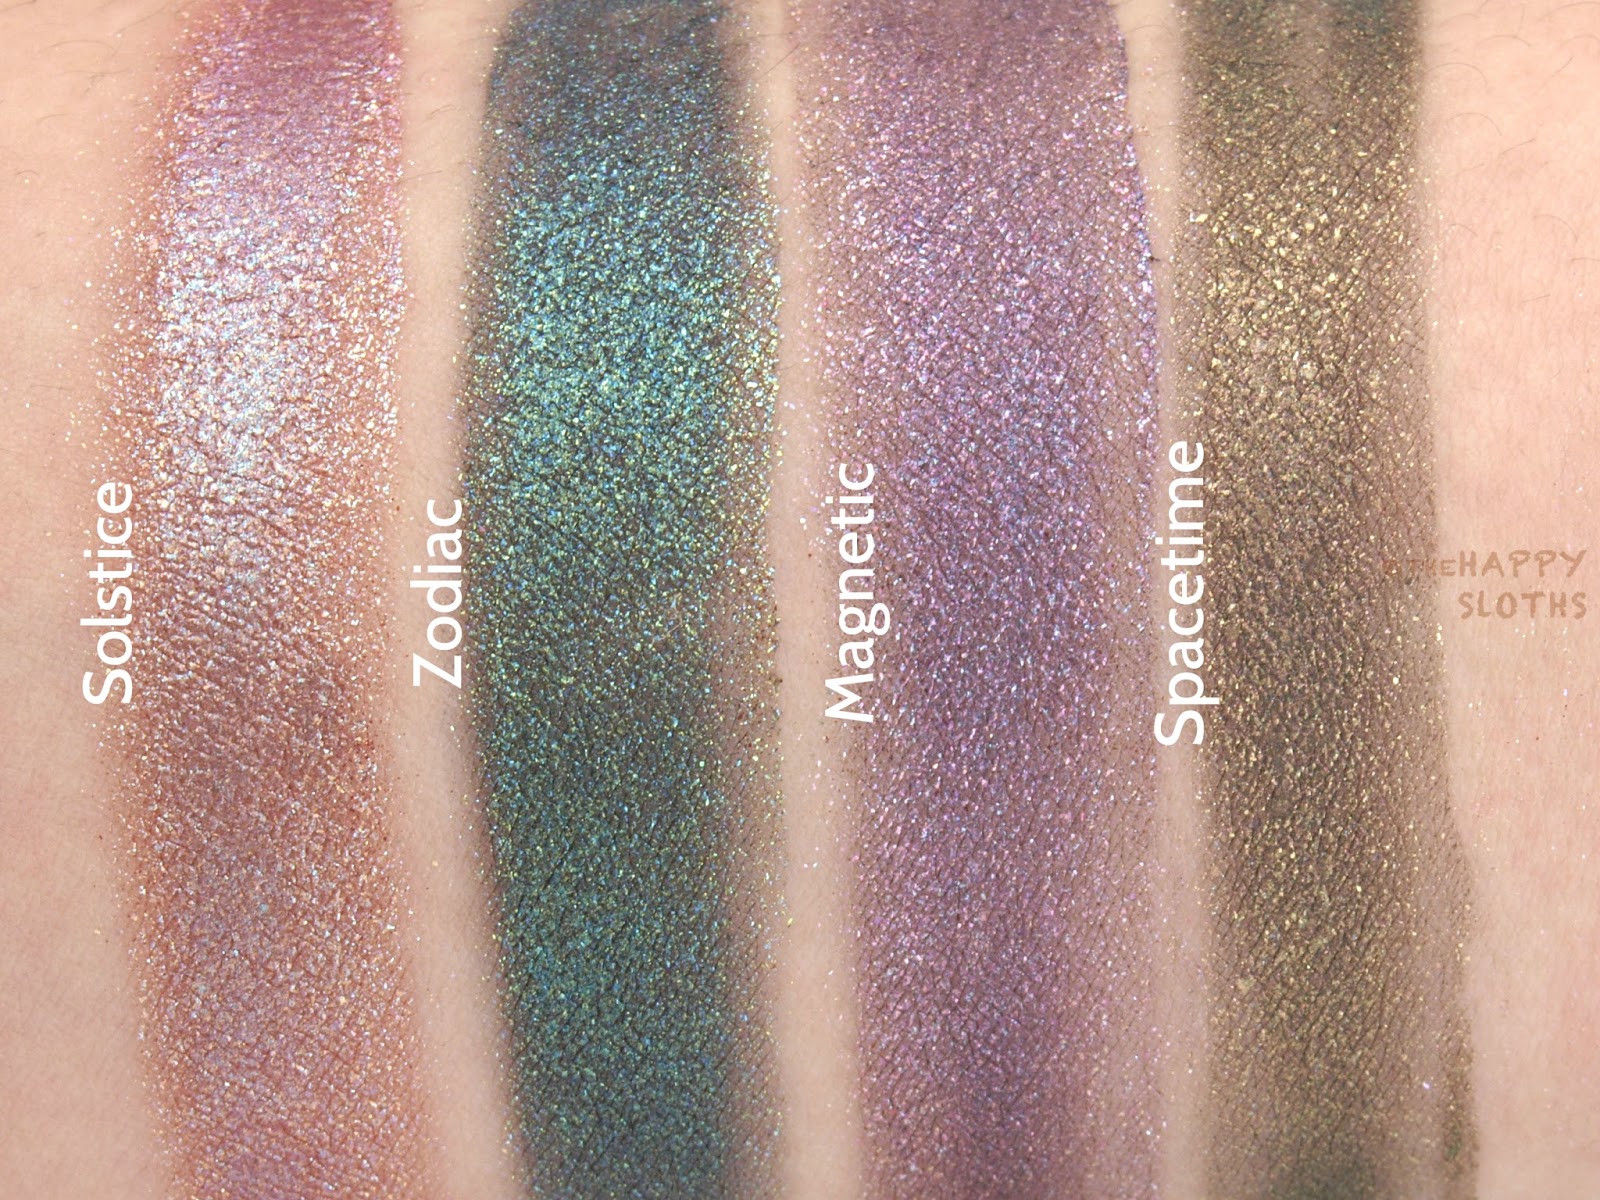 Urban Decay Liquid Moondust Eyeshadow Review and Swatches